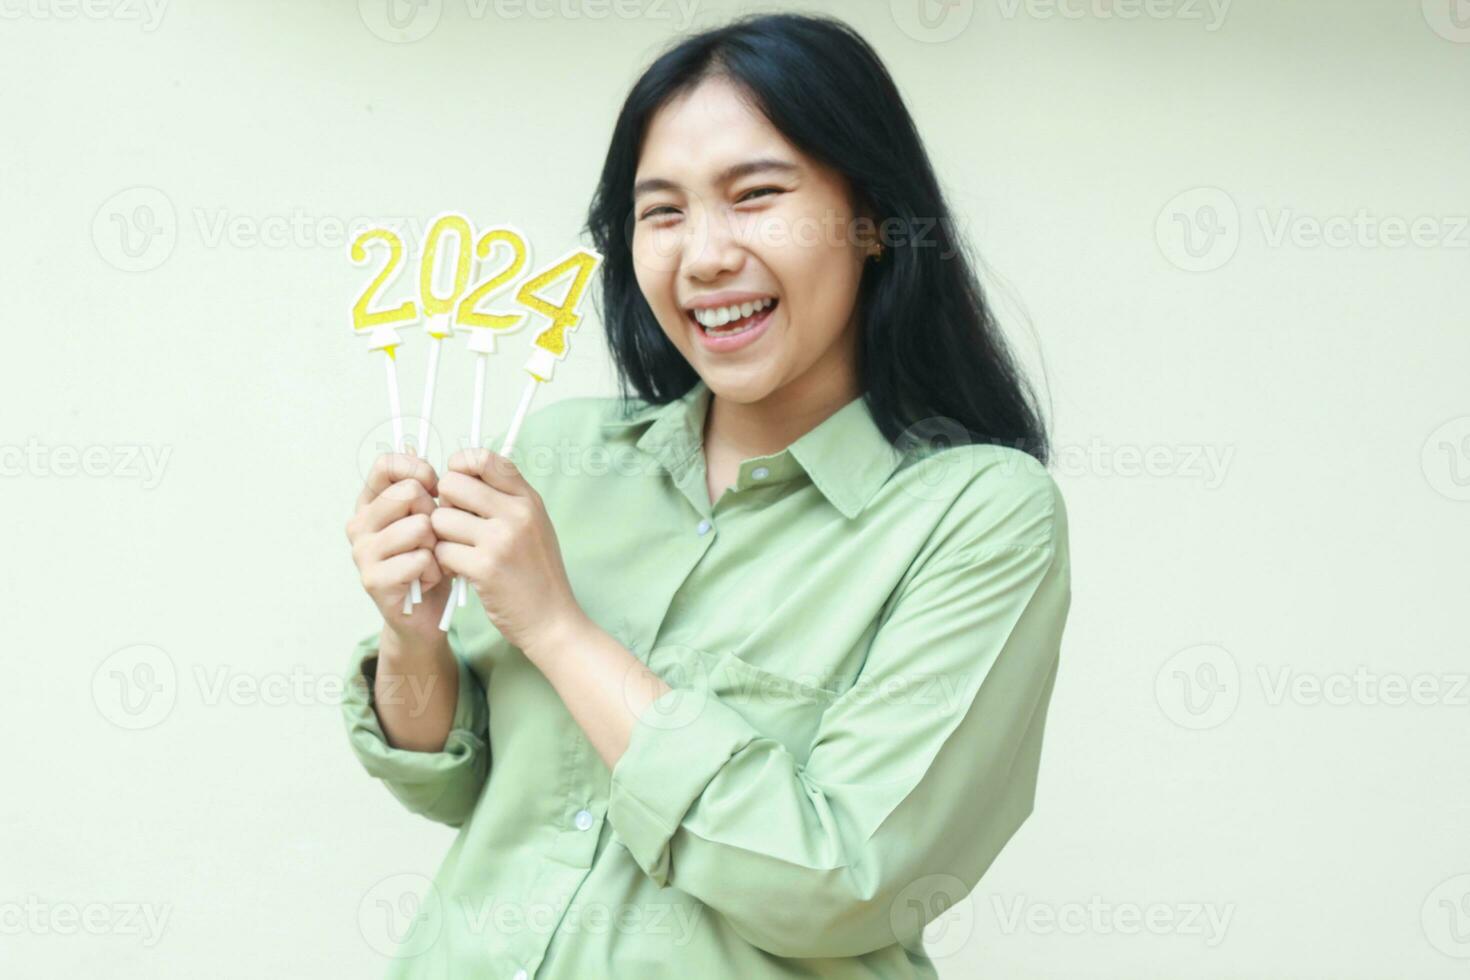 cheerful asian young woman smiling to camera wearing green casual clothes with lifitng arm holding 2024 figure candles to celebrate new years eve, isolated over white background photo